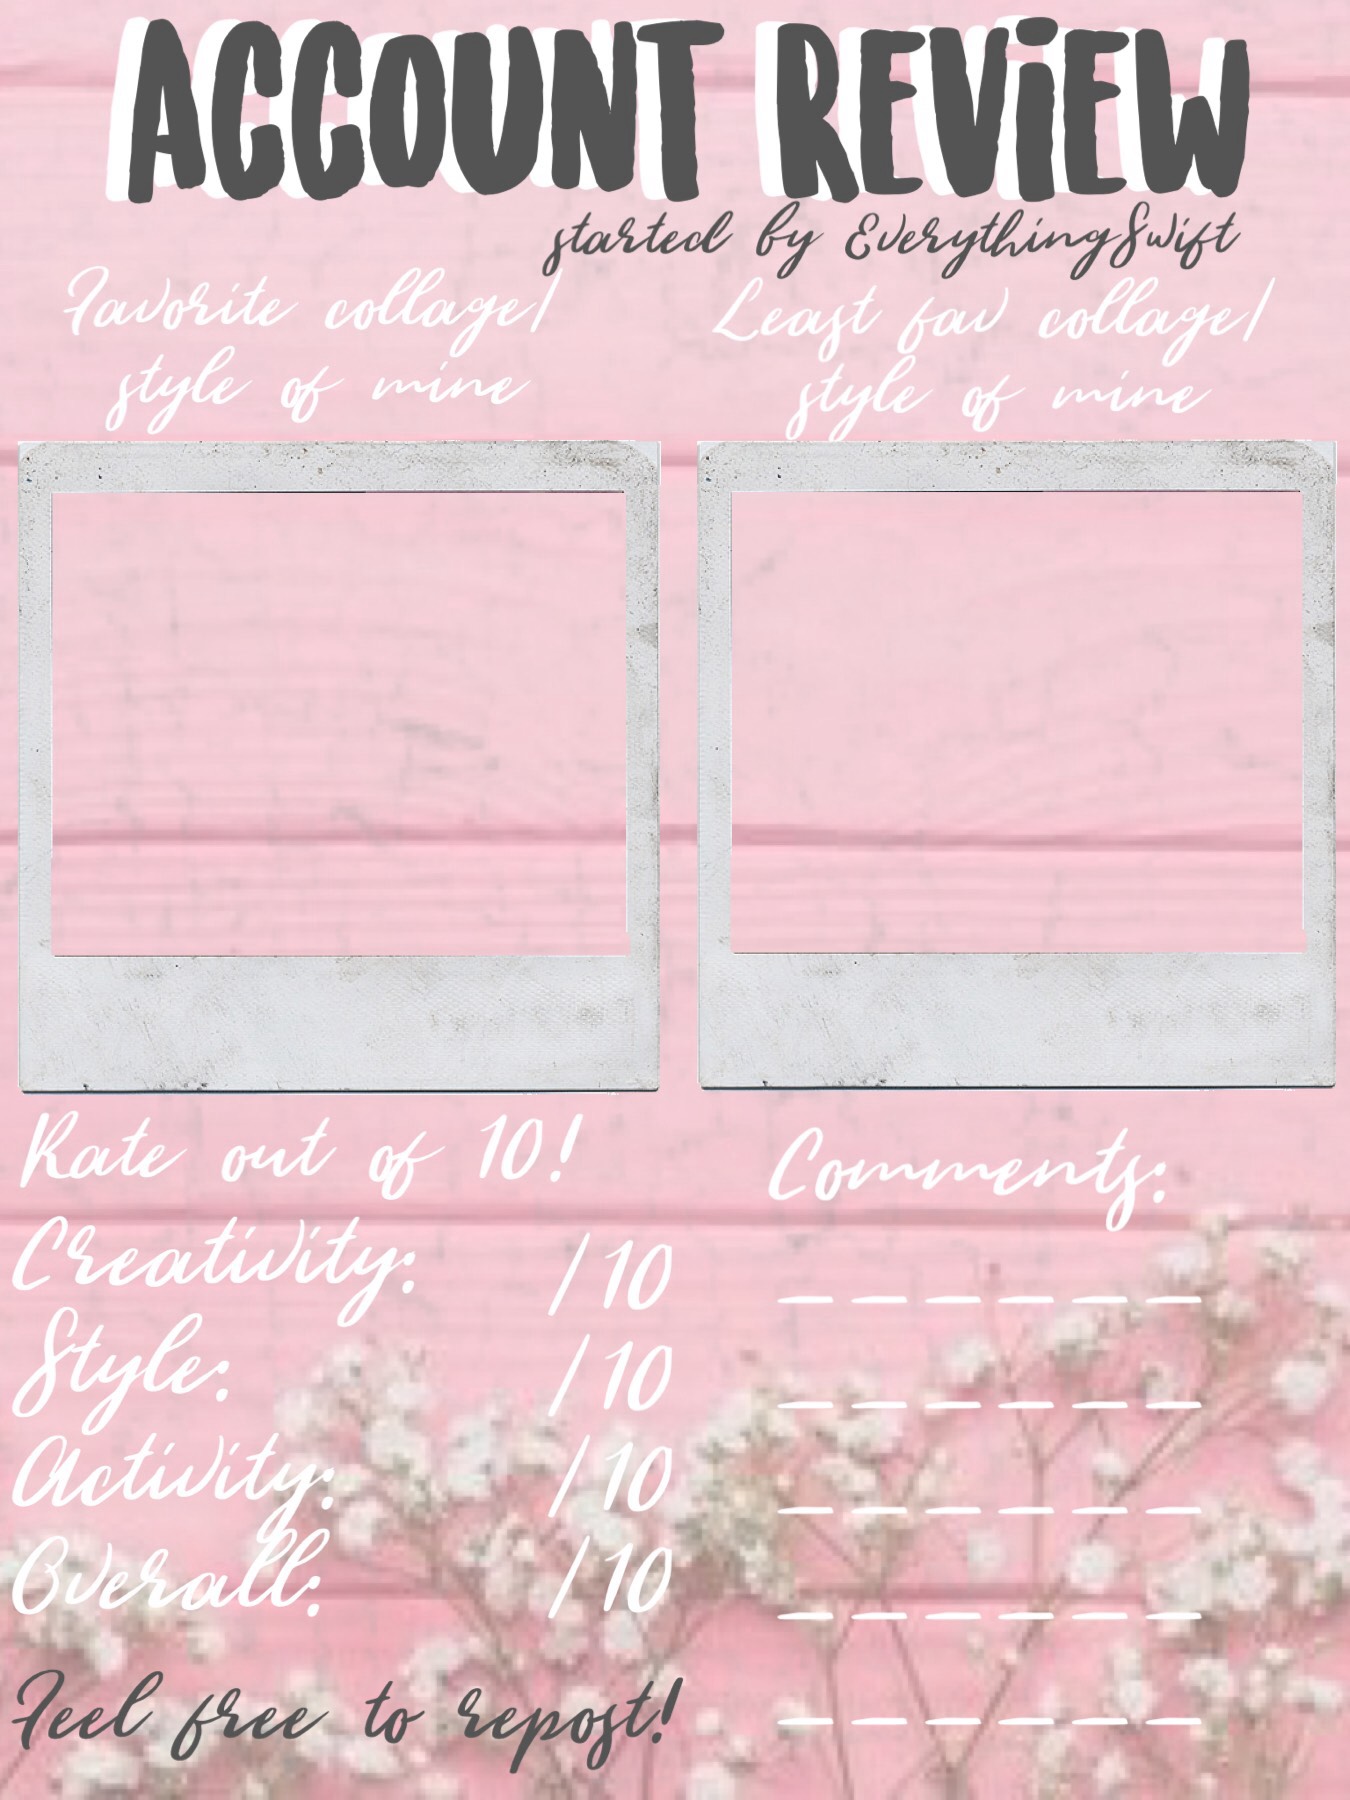 Account Review! I would really appreciate it if you took a few min a filled this out! 💕